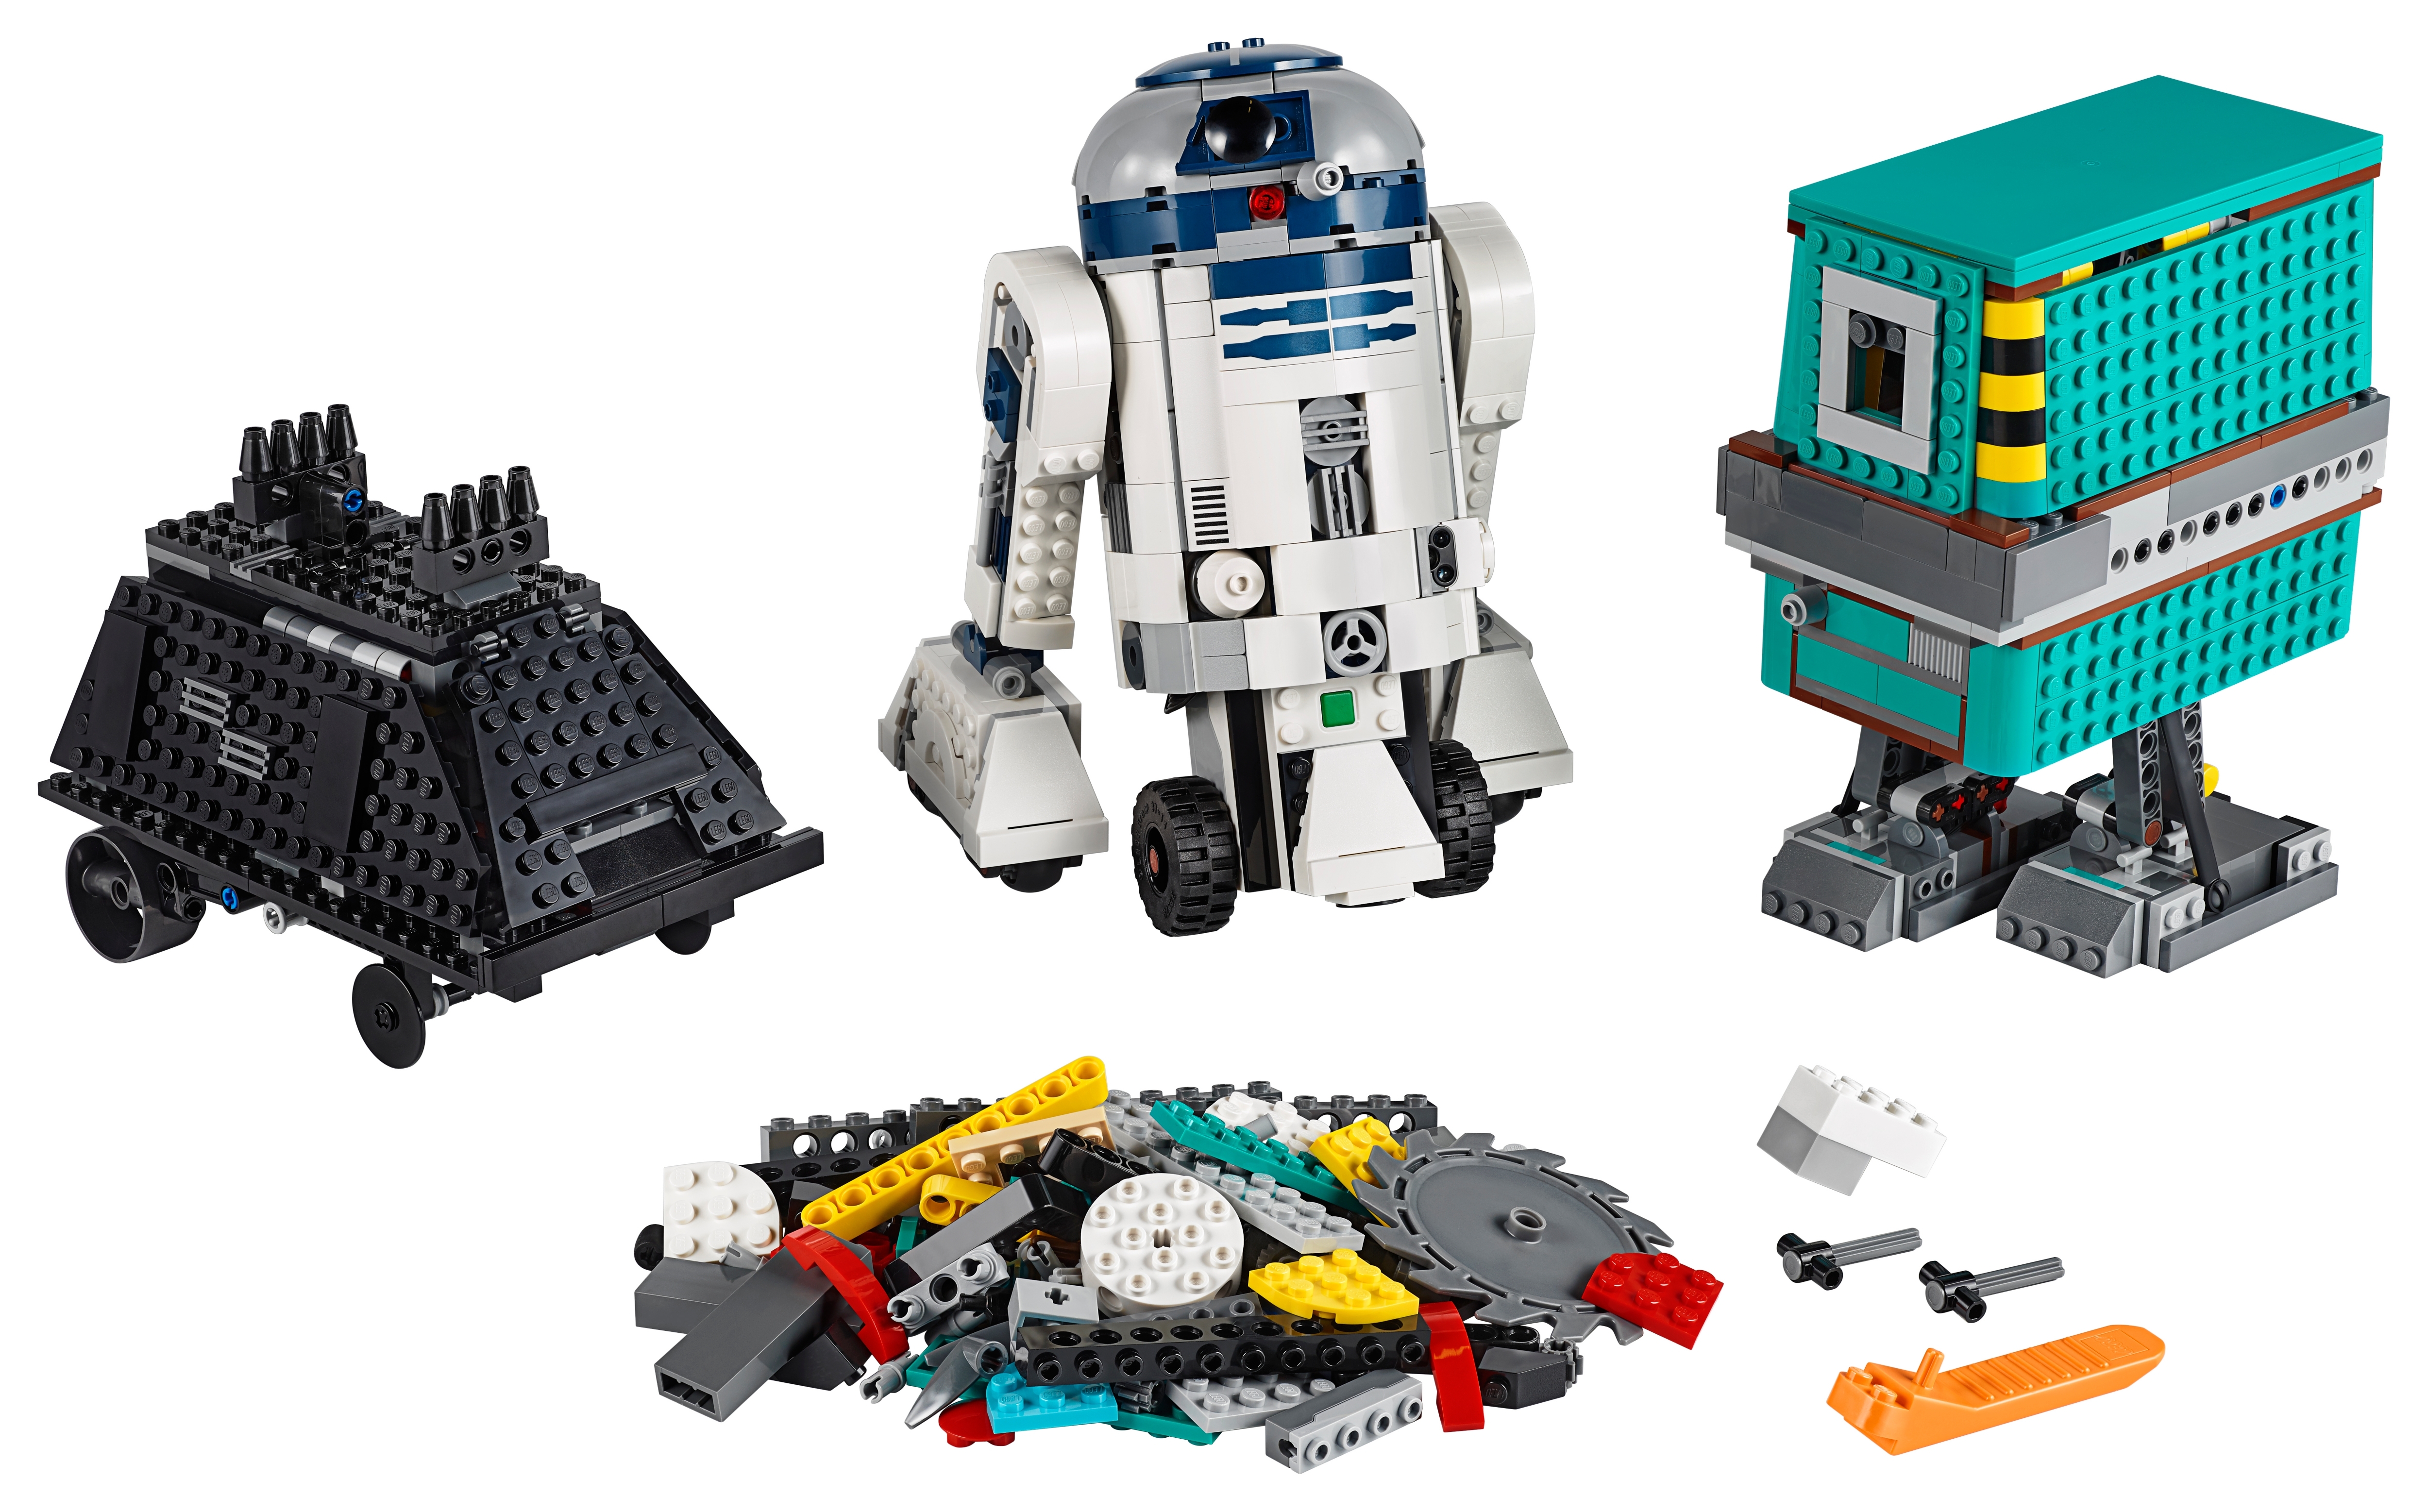 lego robotics for 5 year olds